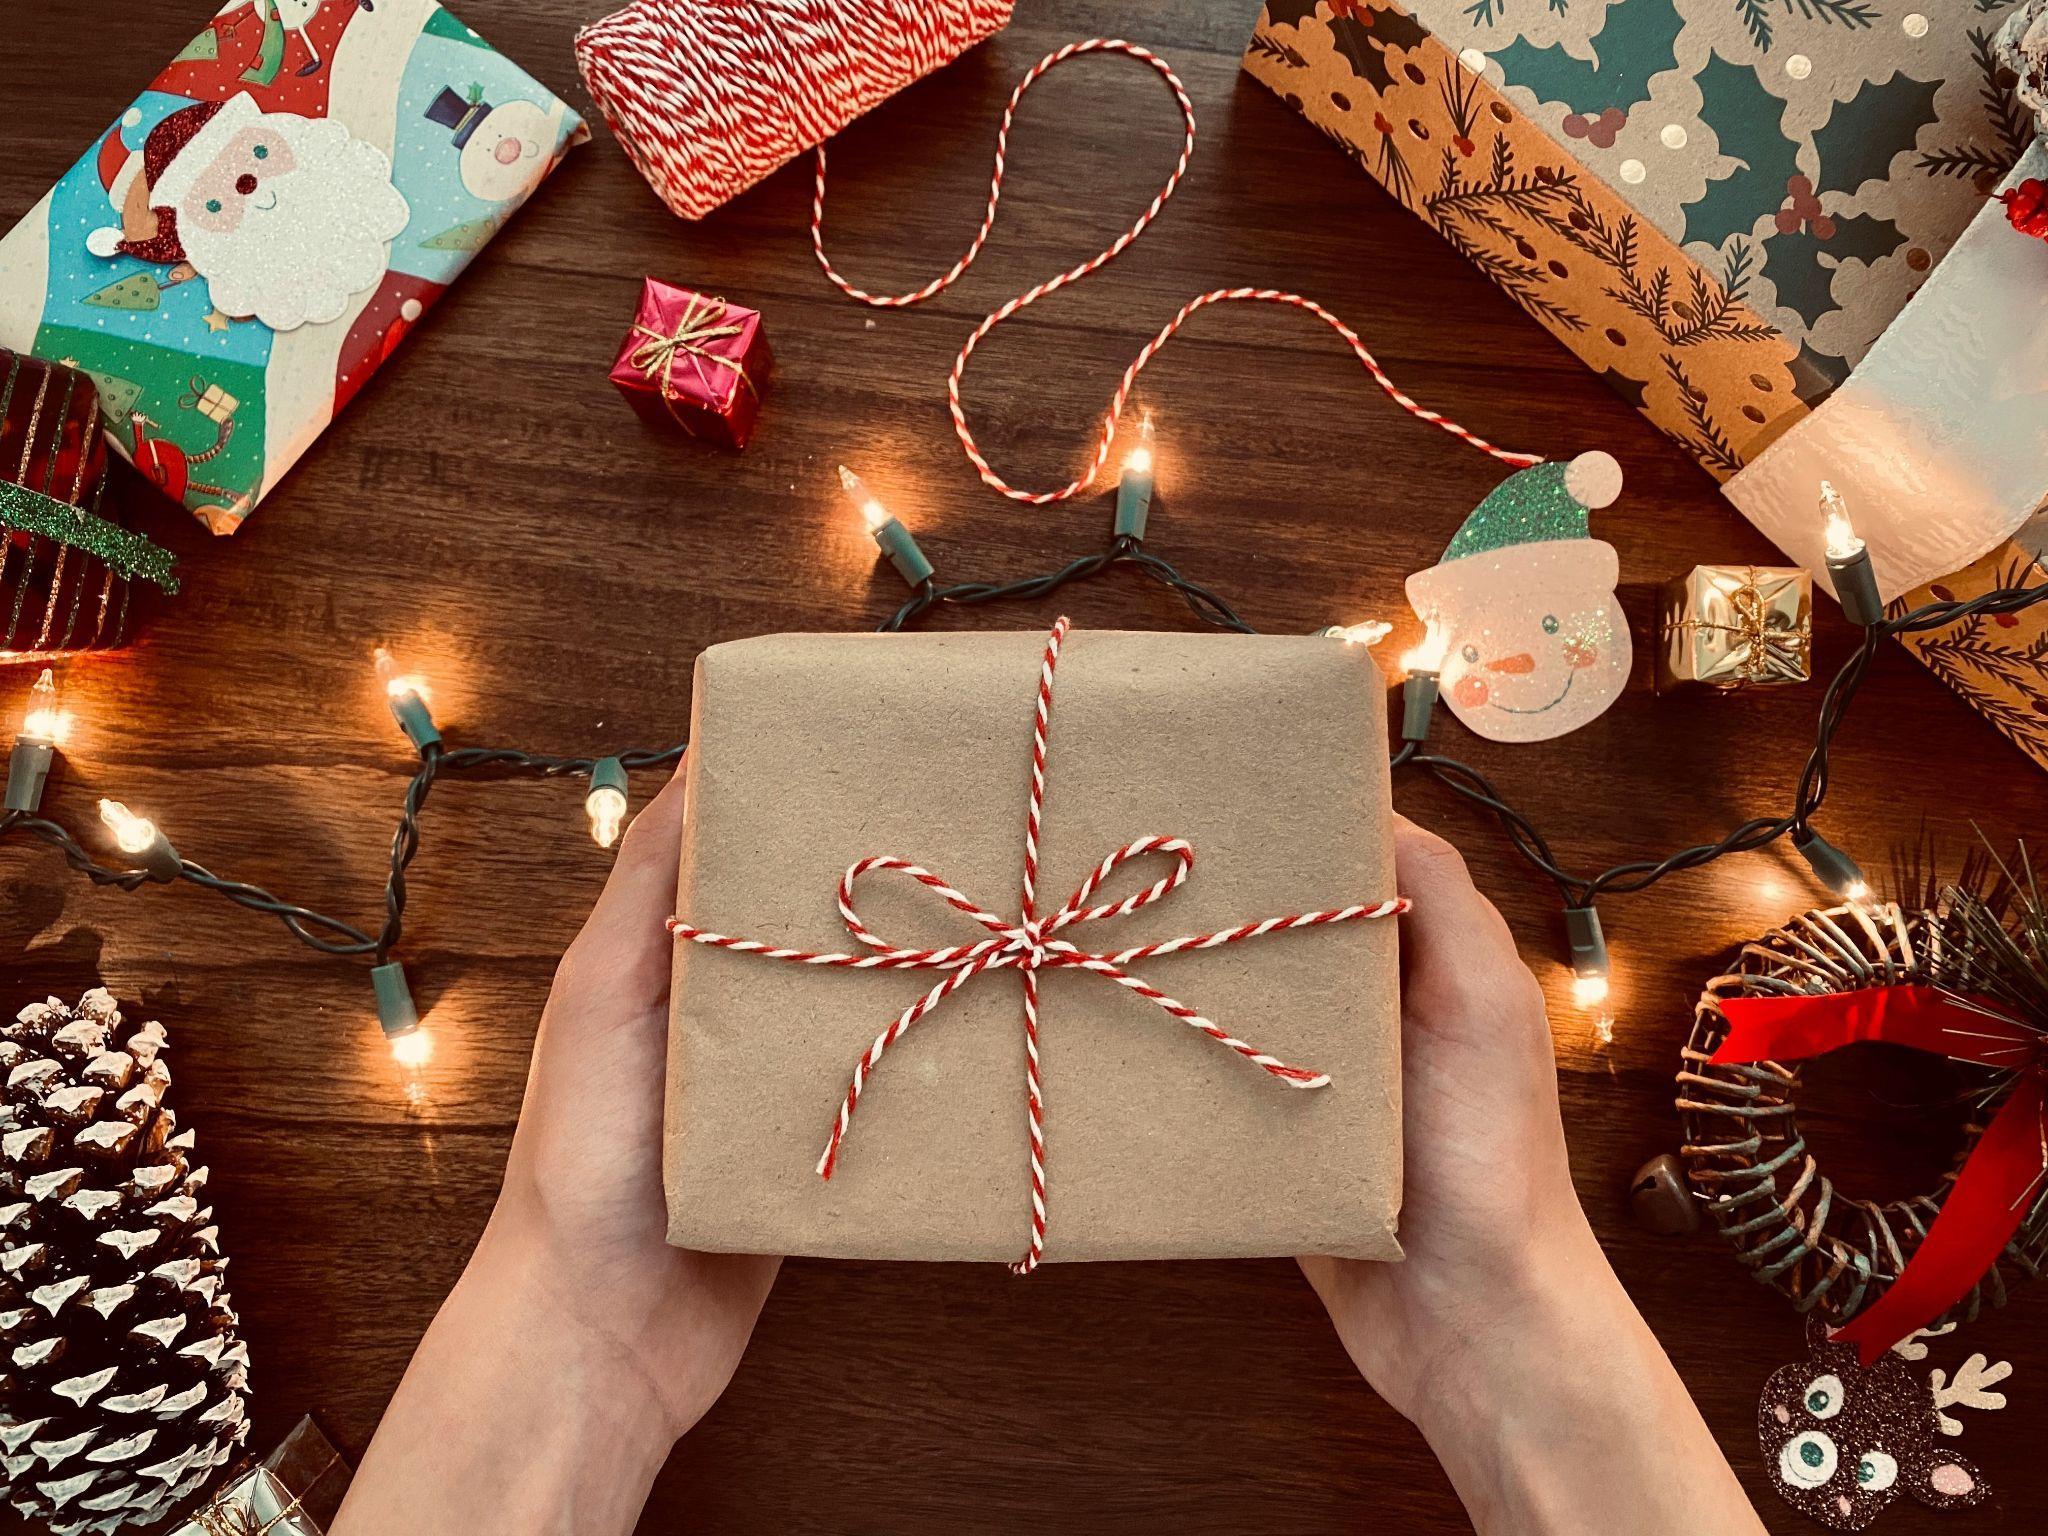 Gifts for a Cause: Level up your gifting game with shops that give back to the community